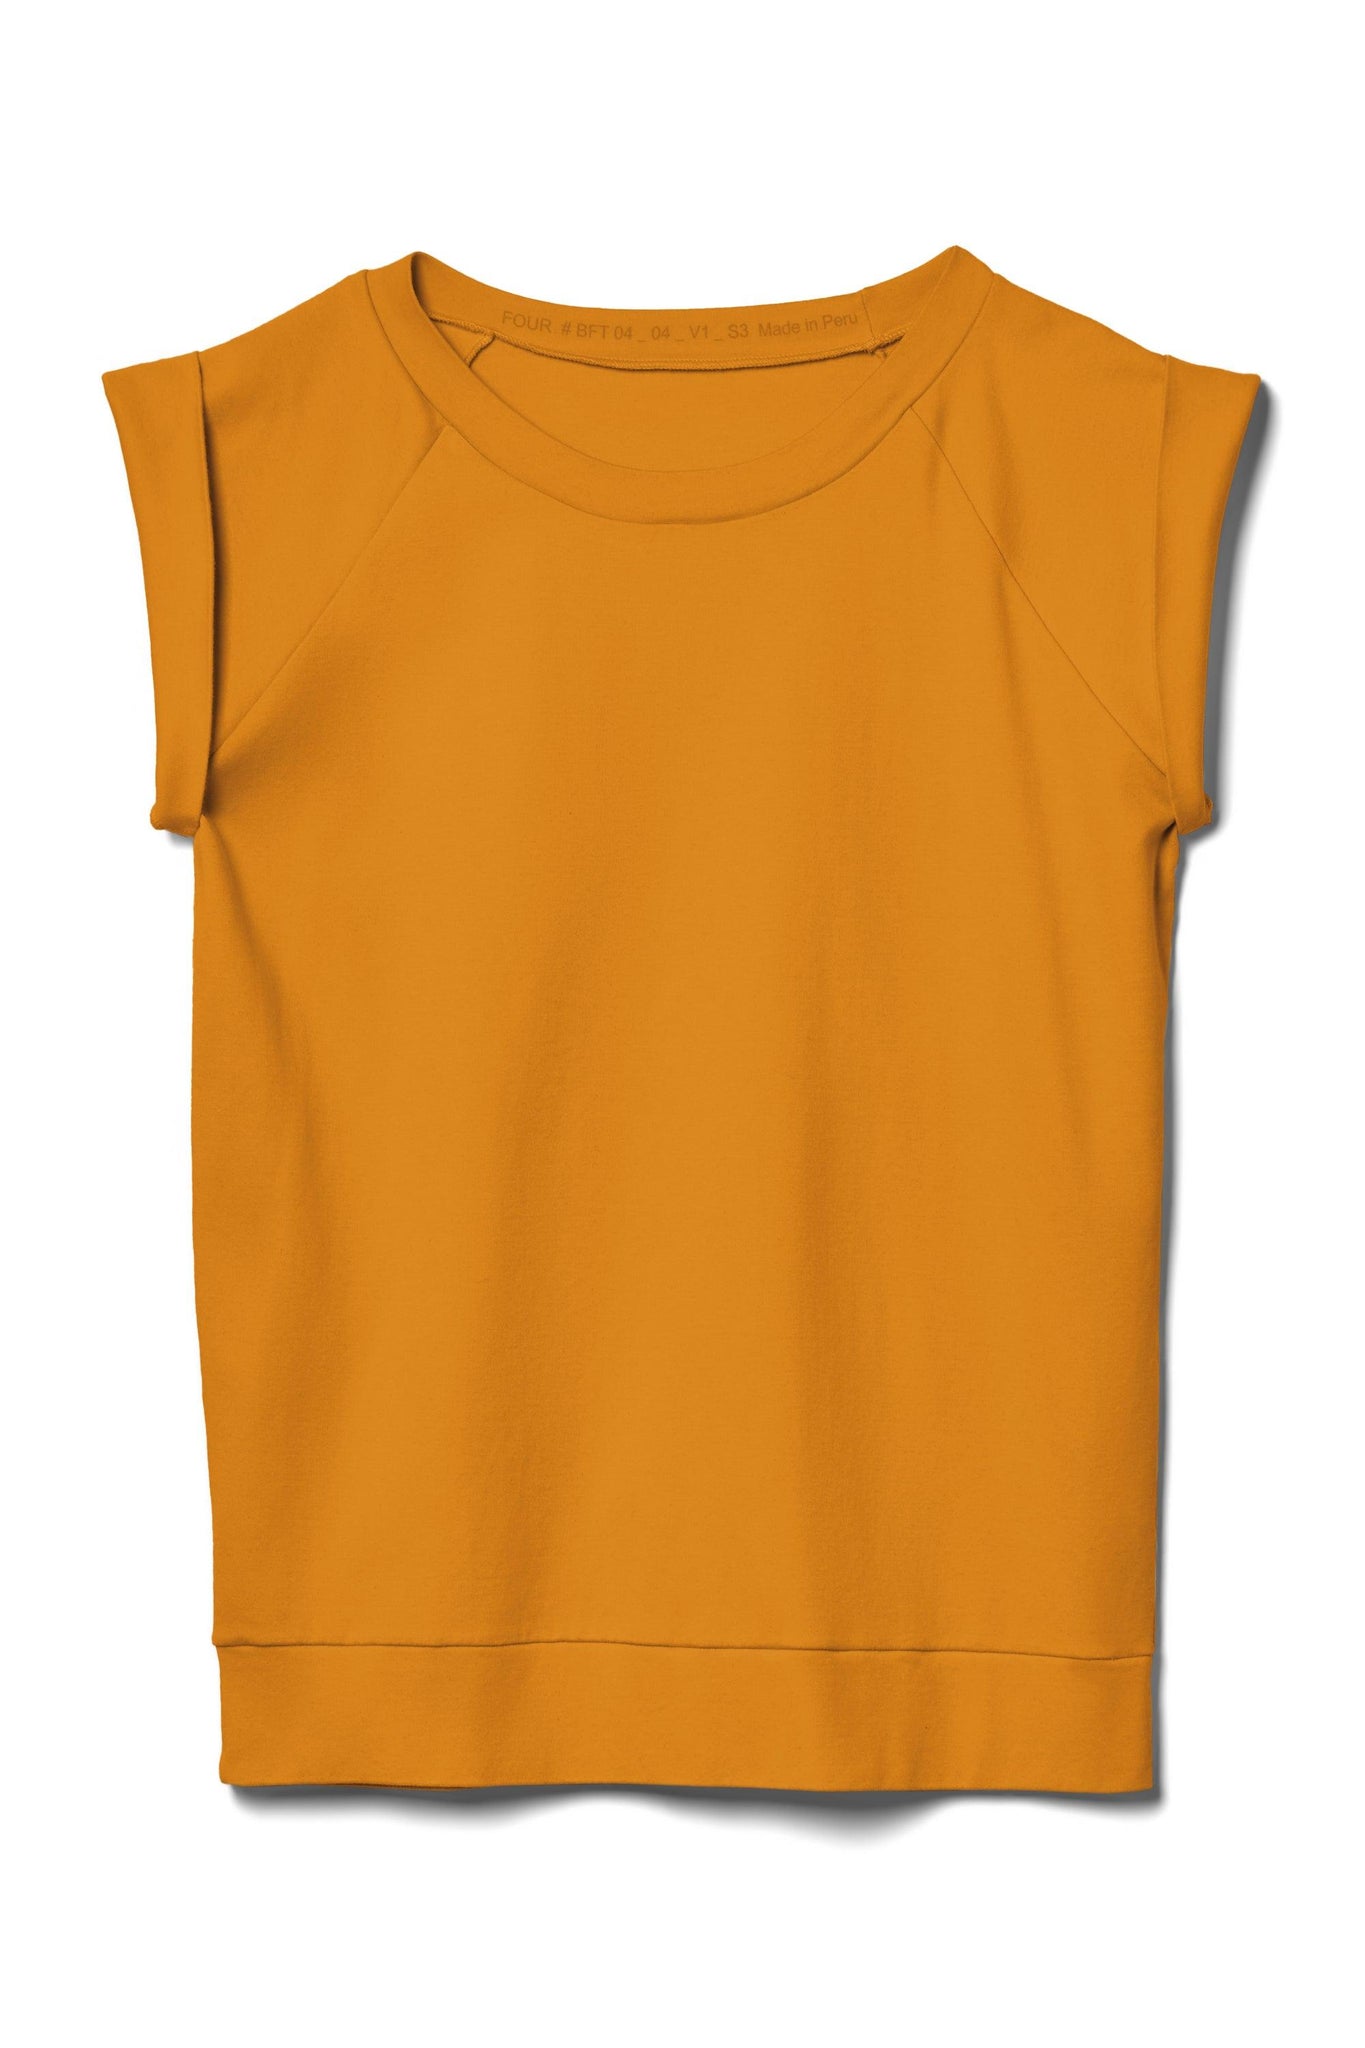 Best Friend Tee in organic supima cotton in seven hand-dyed botanicals by 4 in #BFtee